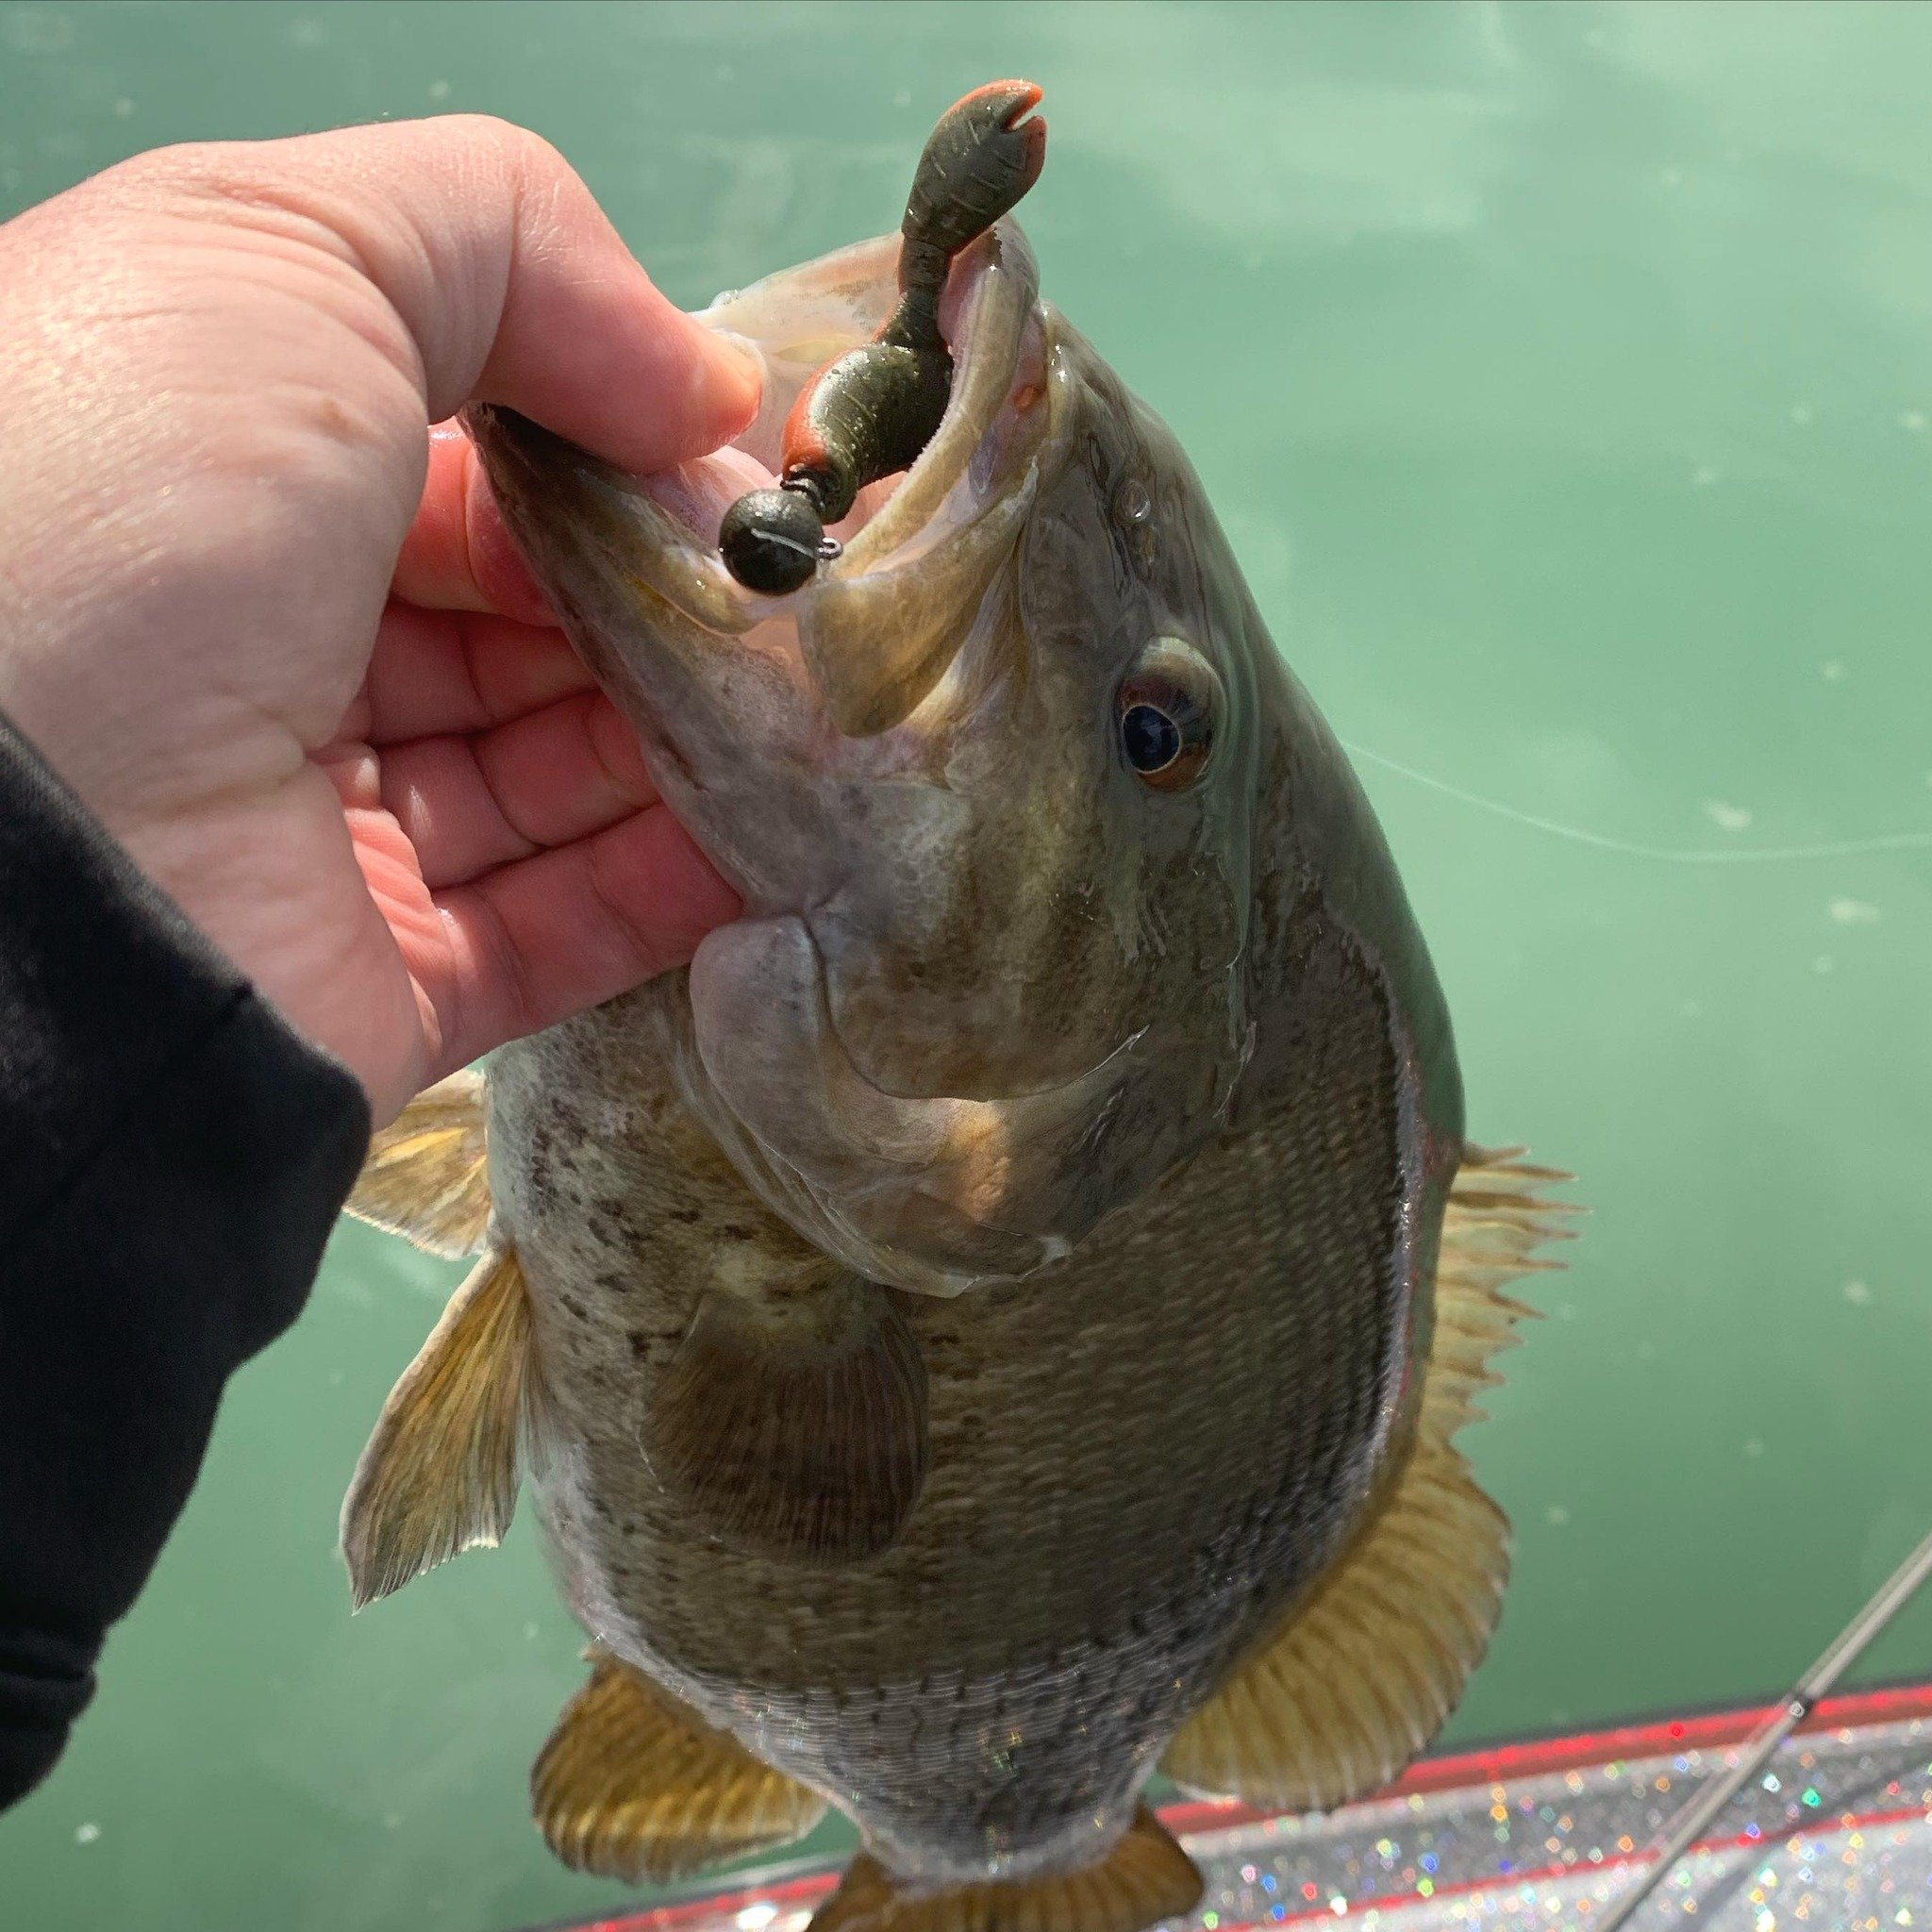 Who&rsquo;s tried the new Green Pumpkin Orange Belly 2.1&rdquo;
Snack Craw yet? It&rsquo;s killer! #floatingclaws #mattefinish 

Buy at Lurenet.com (@lurenetfishing) or from our select retailer partners. 

#greatlakesfinesse #finessefishing #smallmou